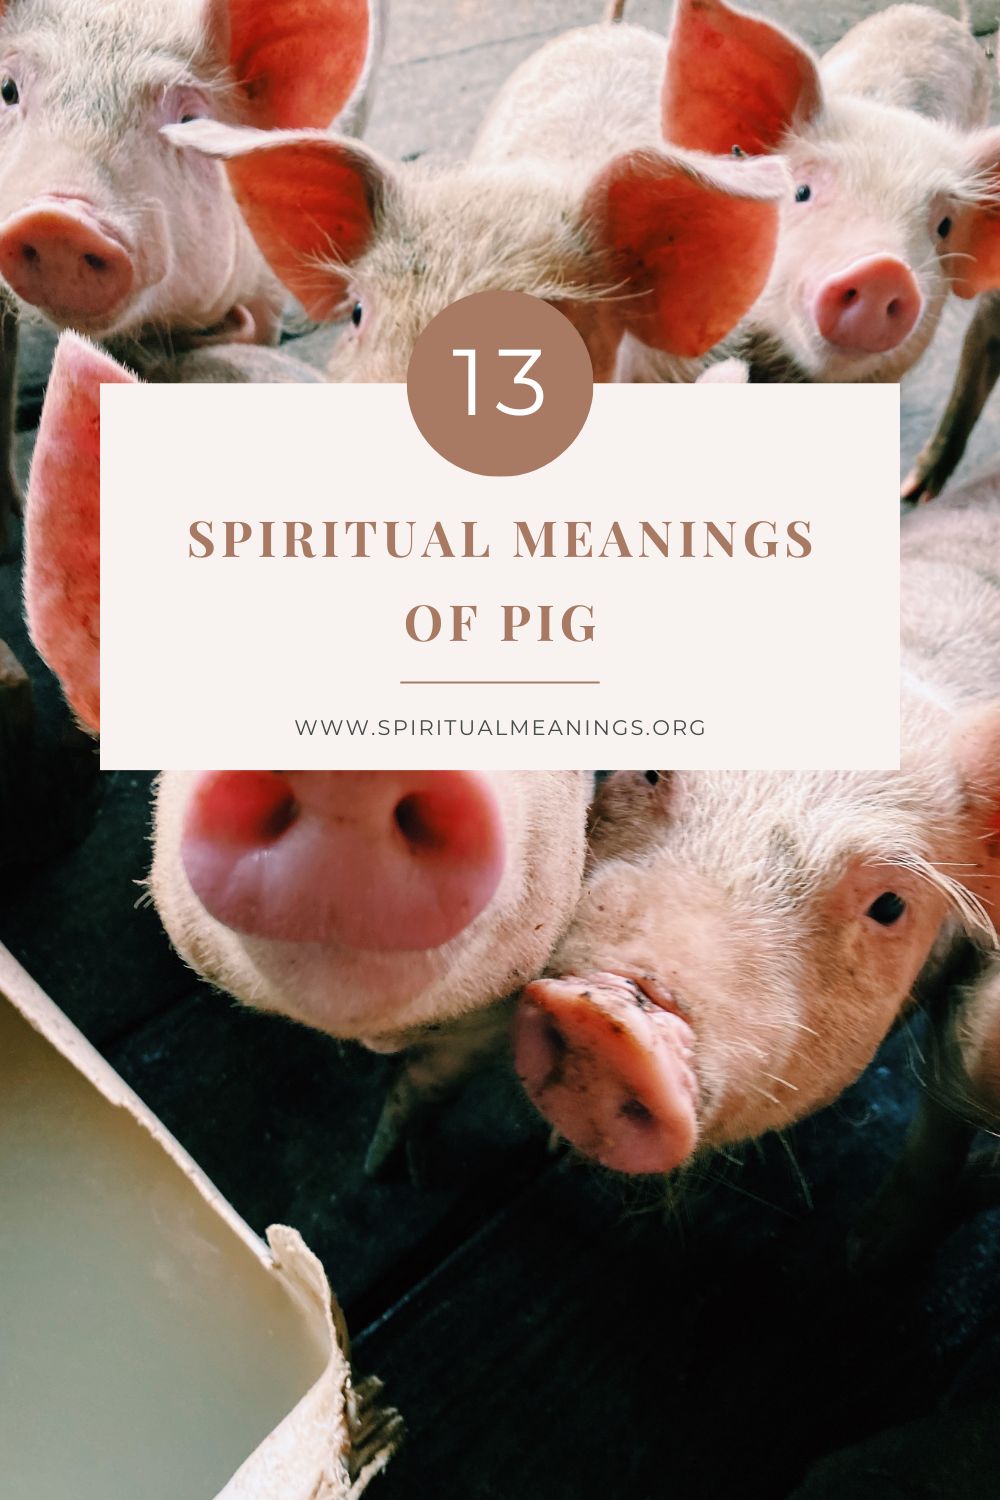 13 Spiritual Meanings of Pig